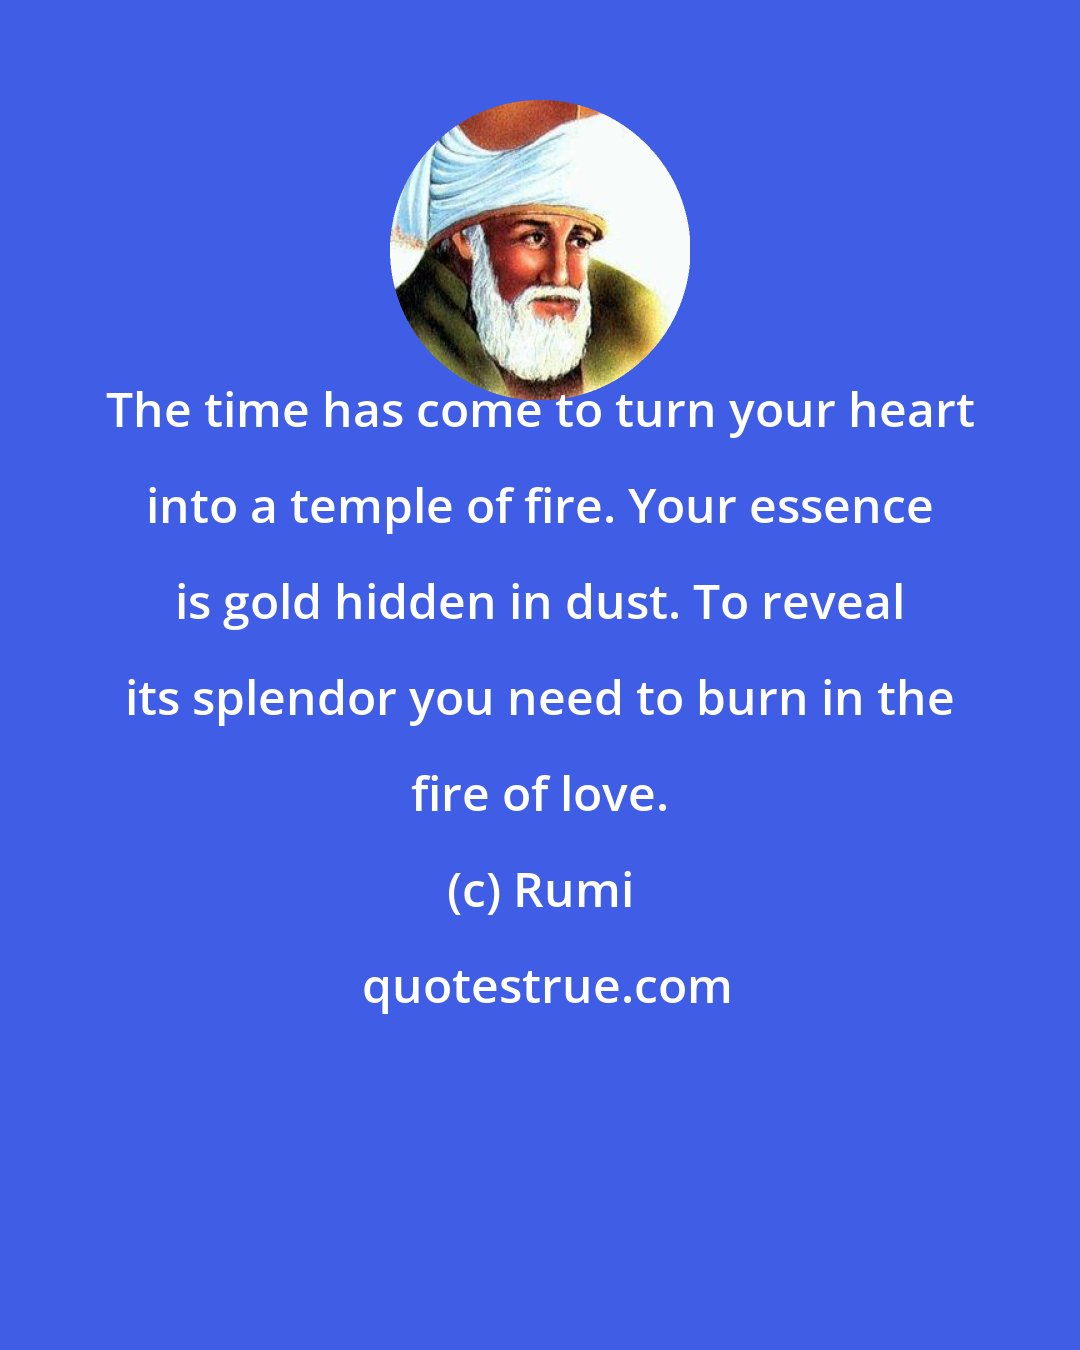 Rumi: The time has come to turn your heart into a temple of fire. Your essence is gold hidden in dust. To reveal its splendor you need to burn in the fire of love.